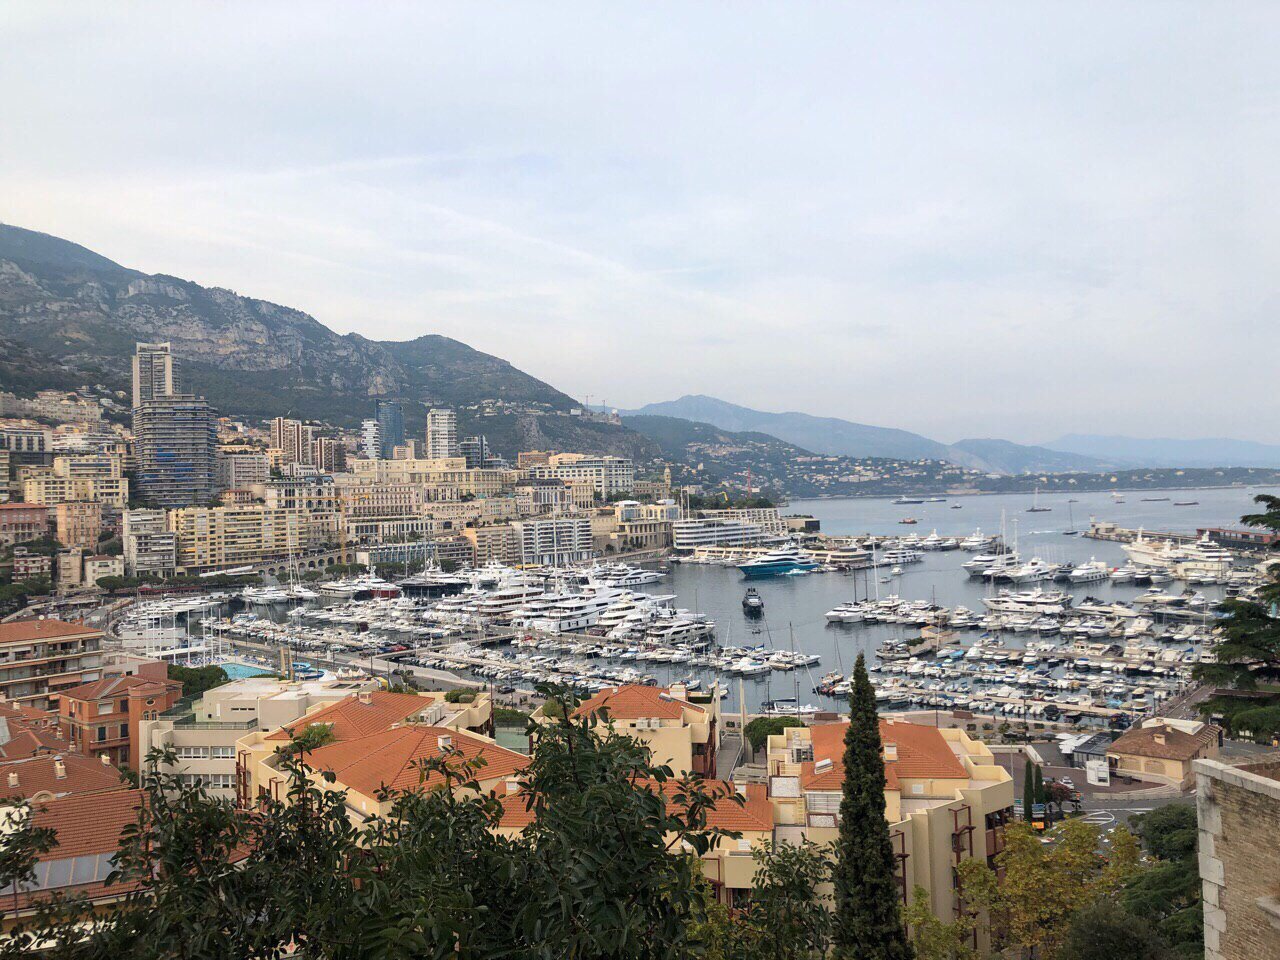 Genoa - Monaco by public transportation: how to get there by bus and train